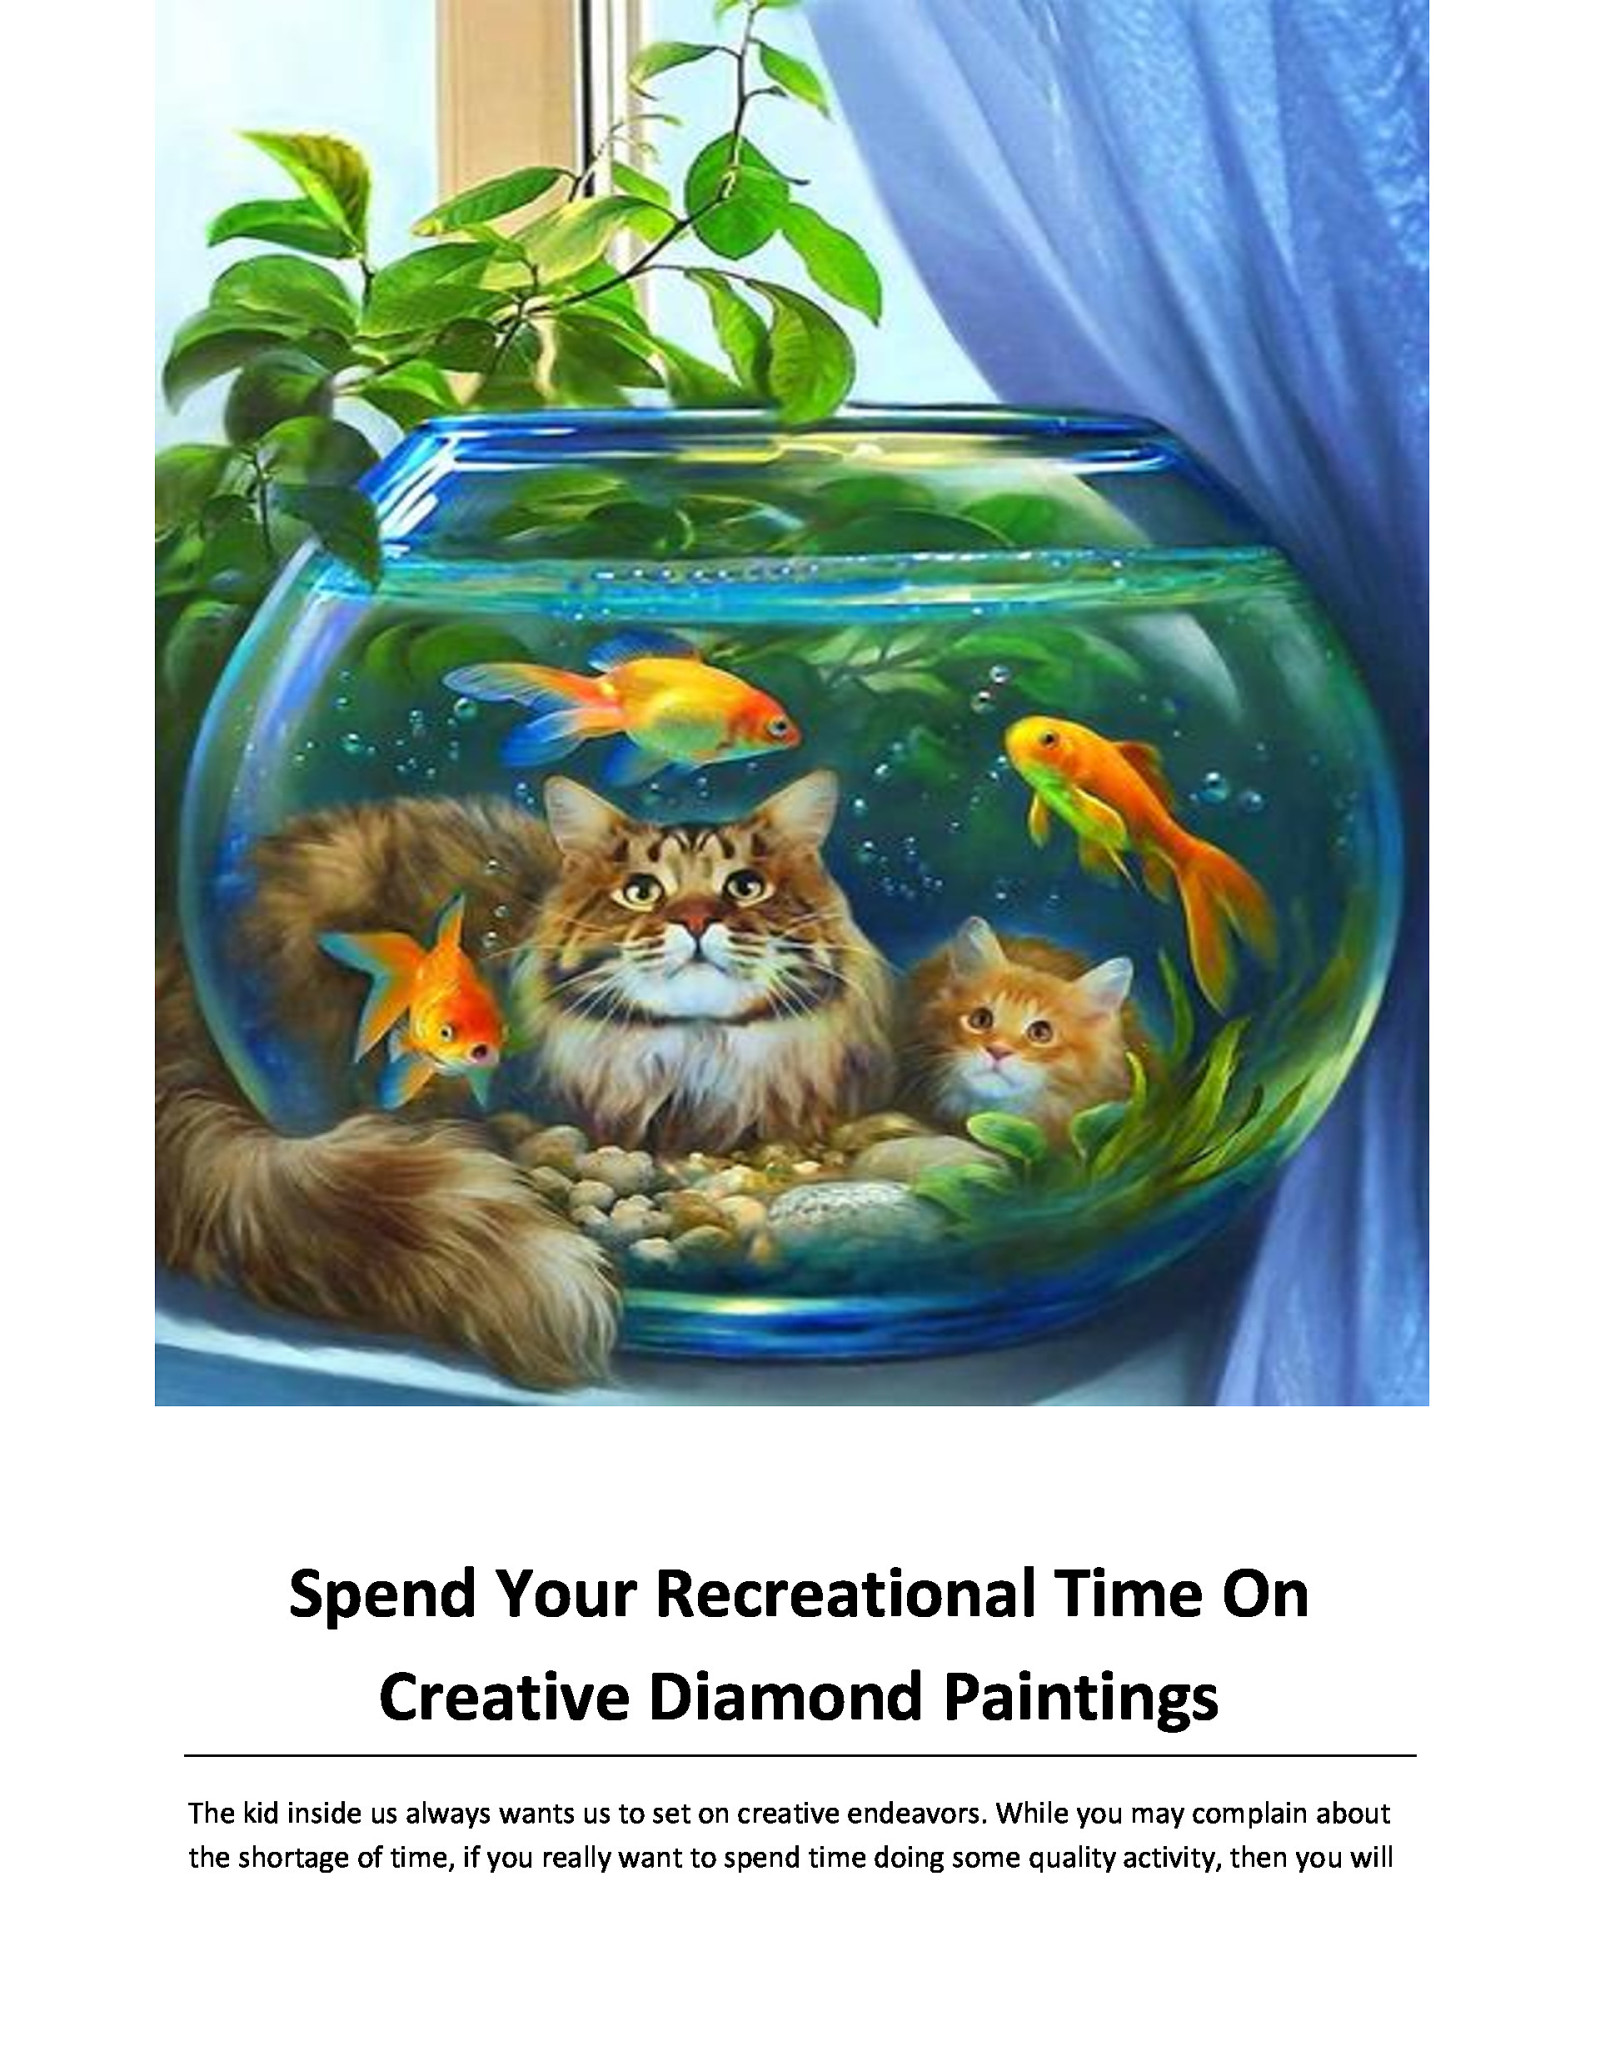 Spend Your Recreational Time On Creative Diamond Paintings